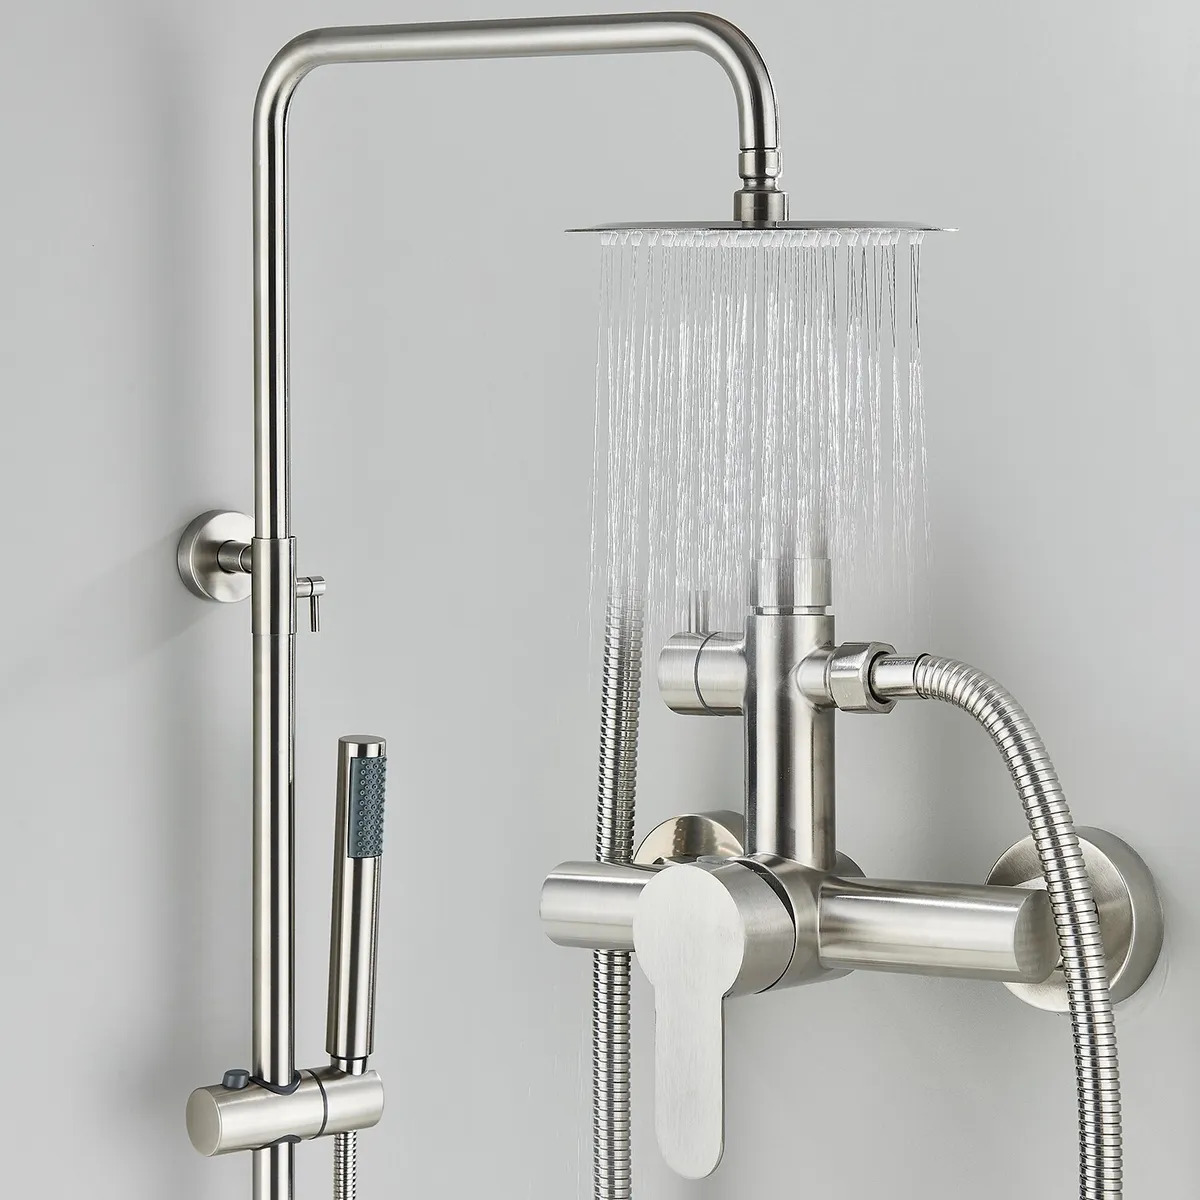 15 Amazing Bath And Shower Faucet Sets for 2023